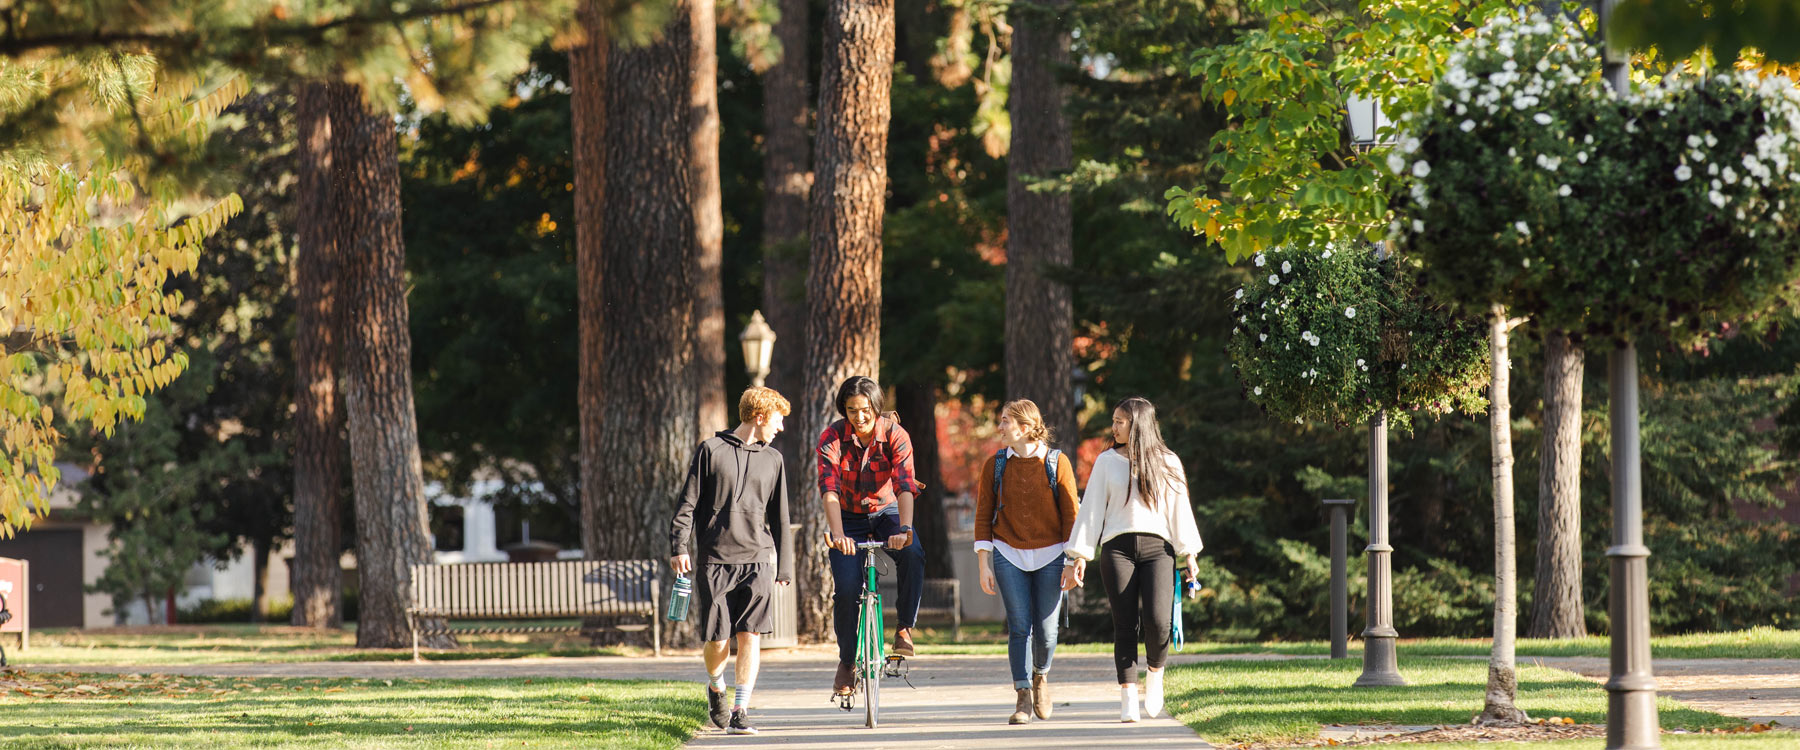 Three students walk and one rides a bike down a tree-lined path on a sunny autumn day.